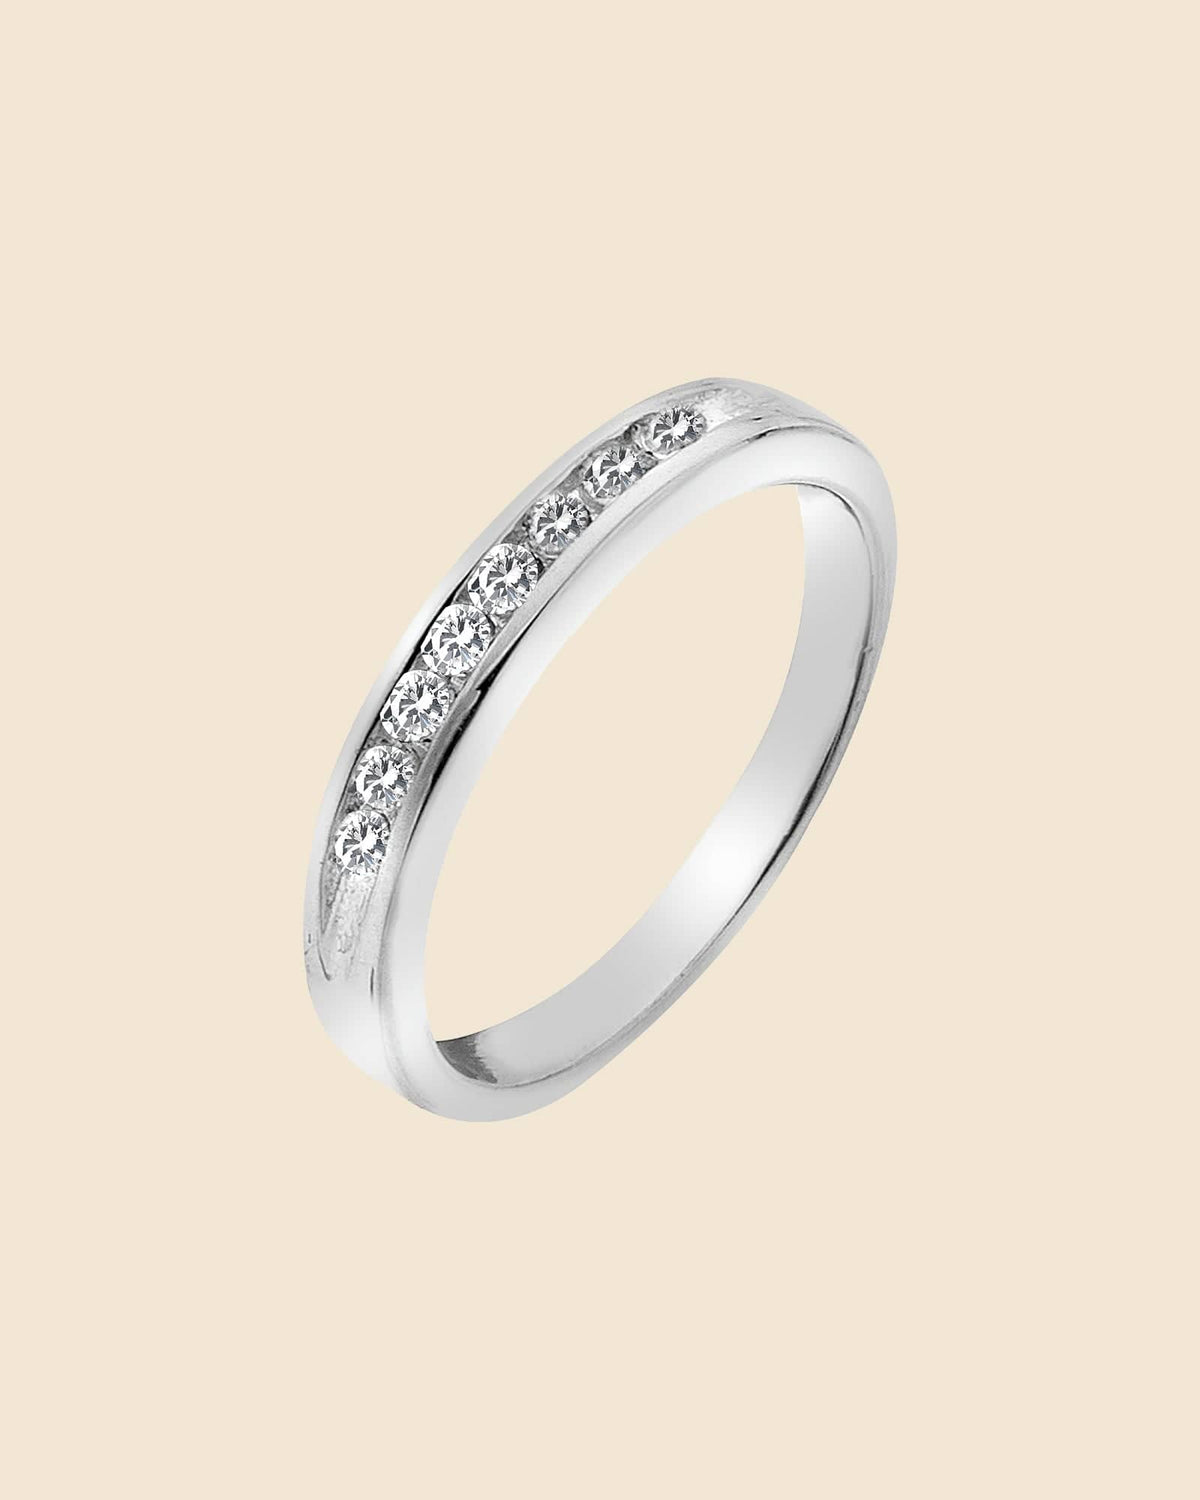 Sterling Silver Band With Cubic Zirconia Inlay